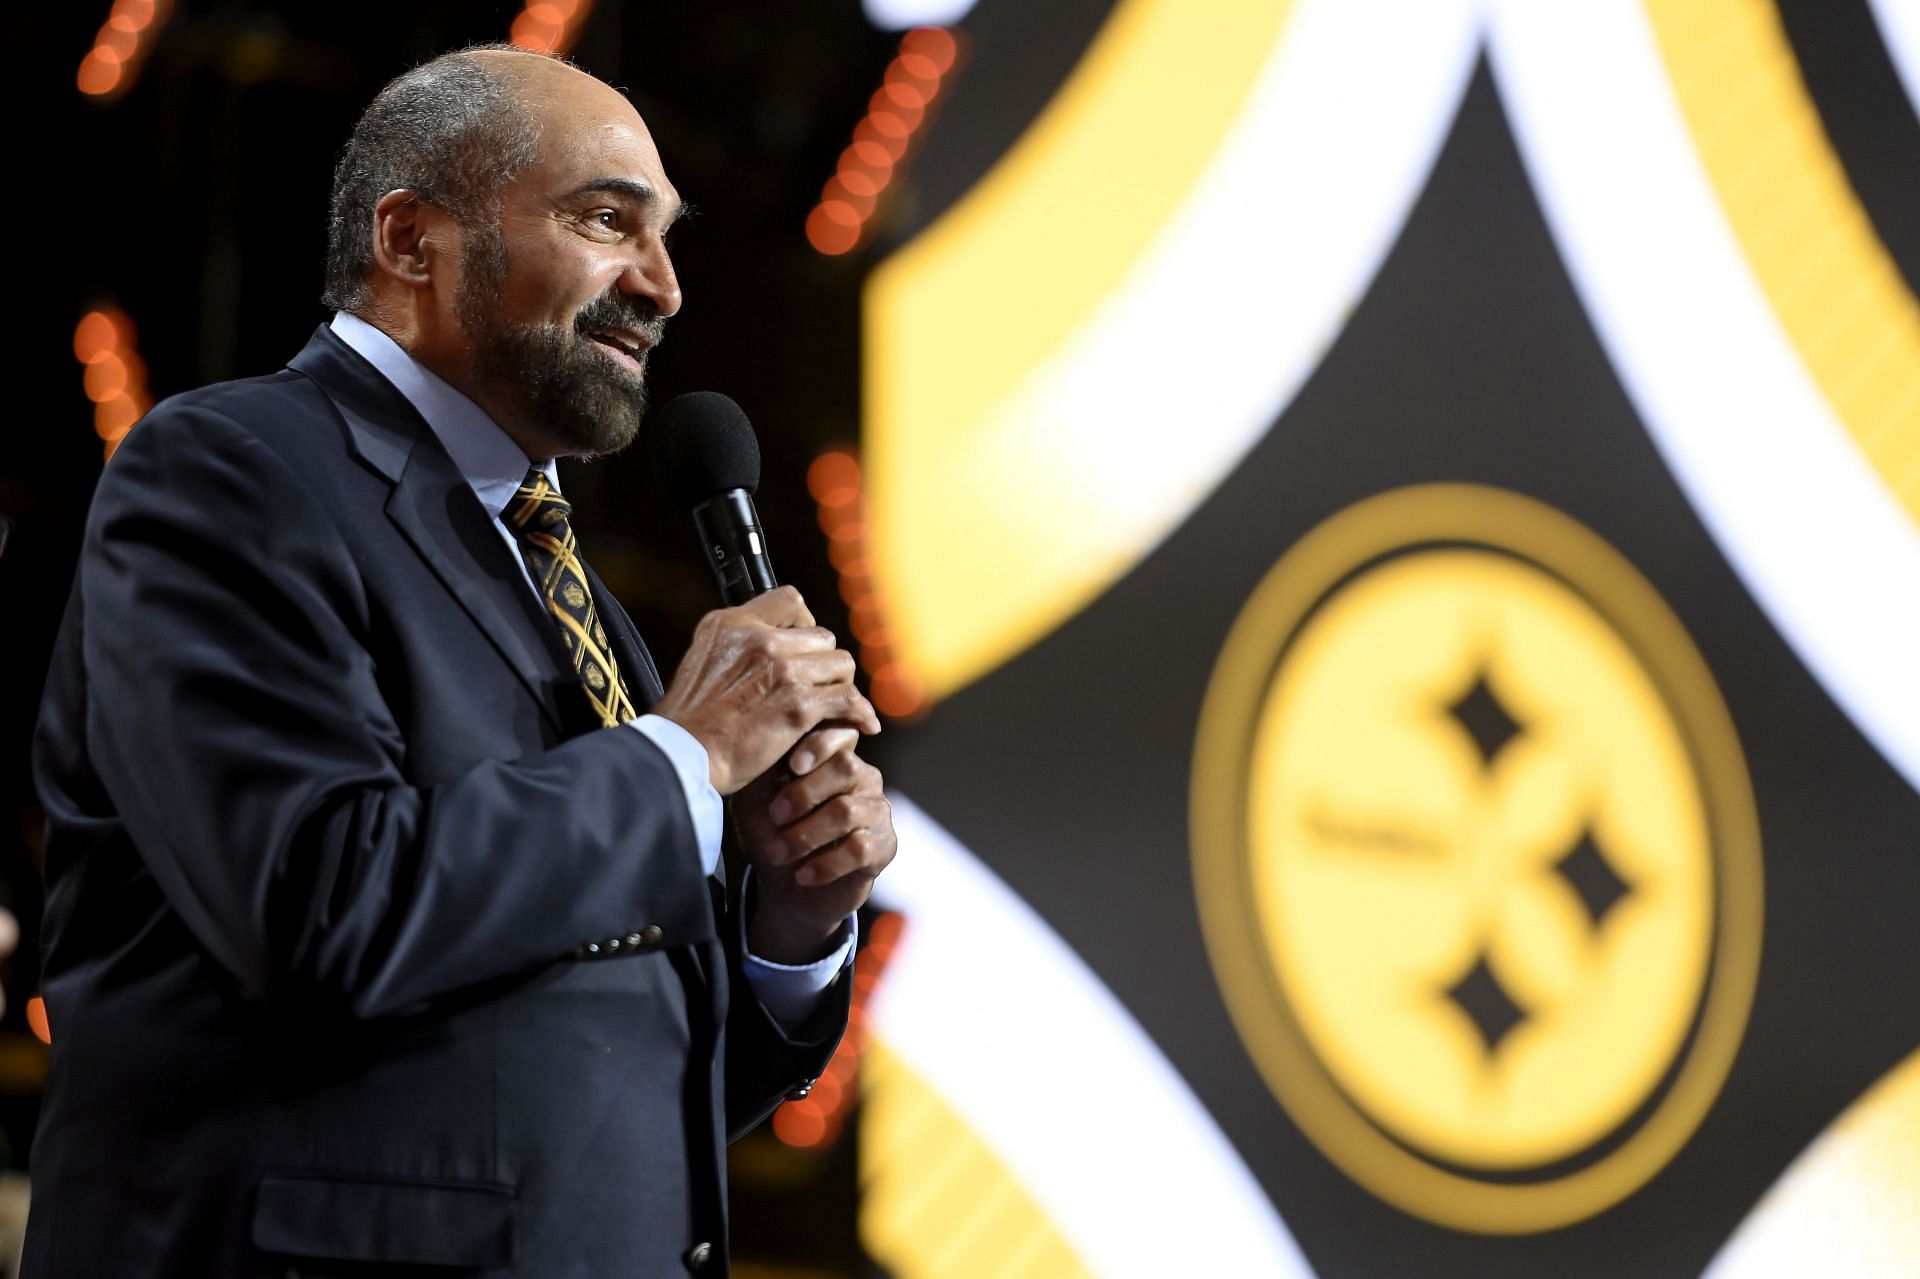 Franco Harris at the 2022 NFL Draft - Round 1